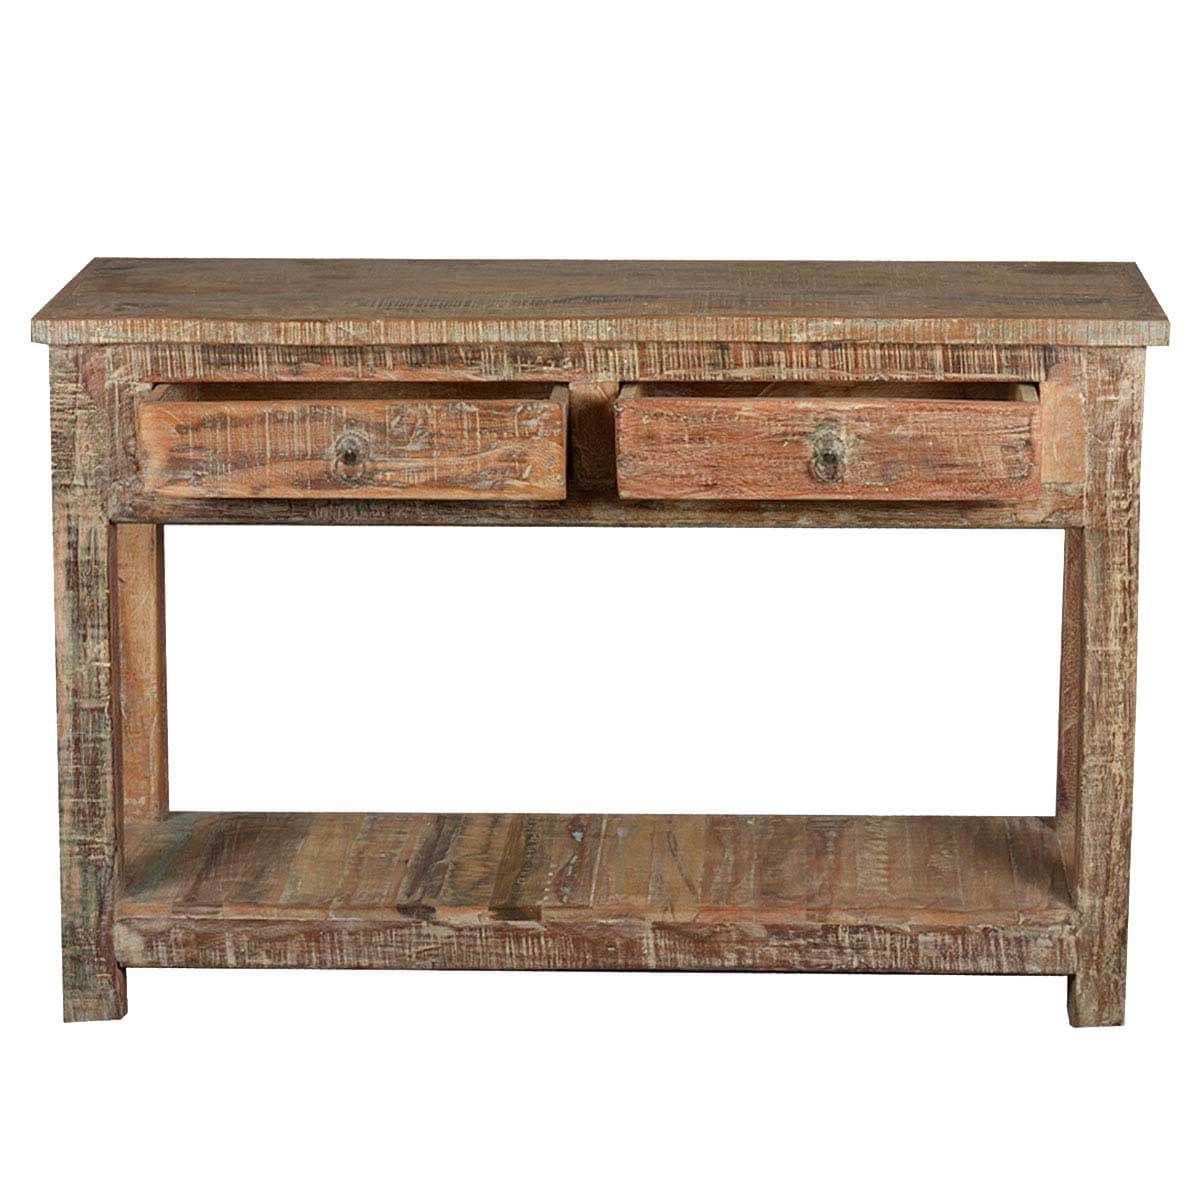 2020 Rustic Reclaimed Wood Naturally Distressed Hall Console Table Pertaining To Square Weathered White Wood Console Tables (View 7 of 10)